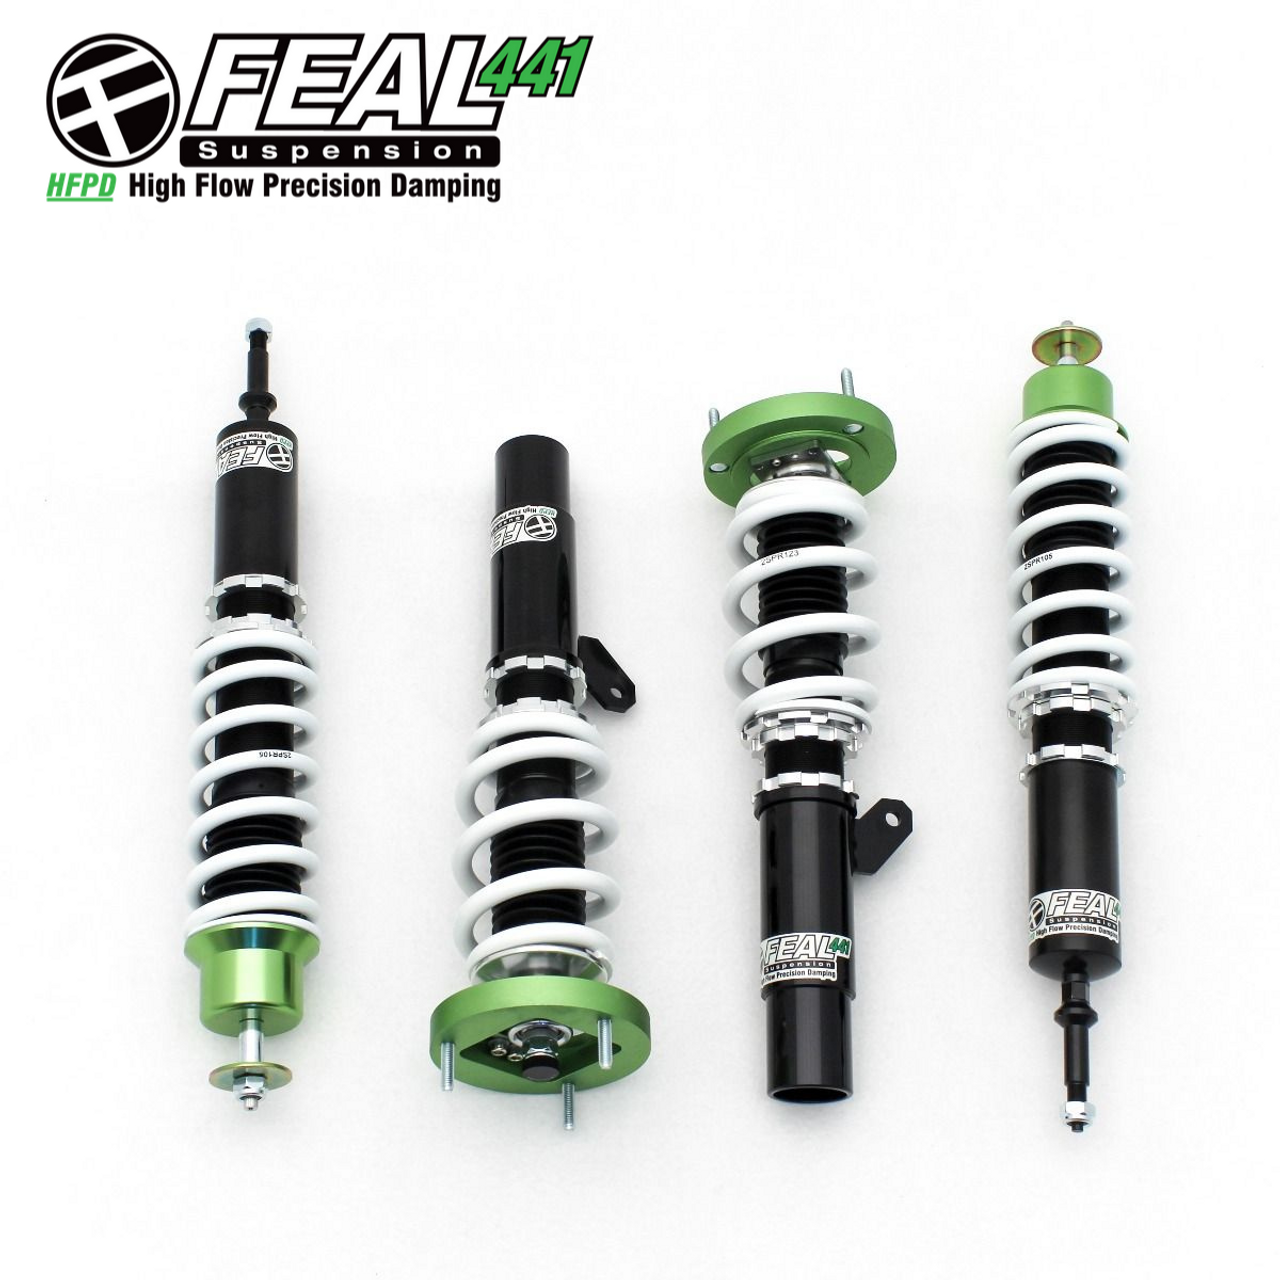 Feal Suspension 441 Coilovers - 2005 - 2013 BMW 3 Series (E90) RWD